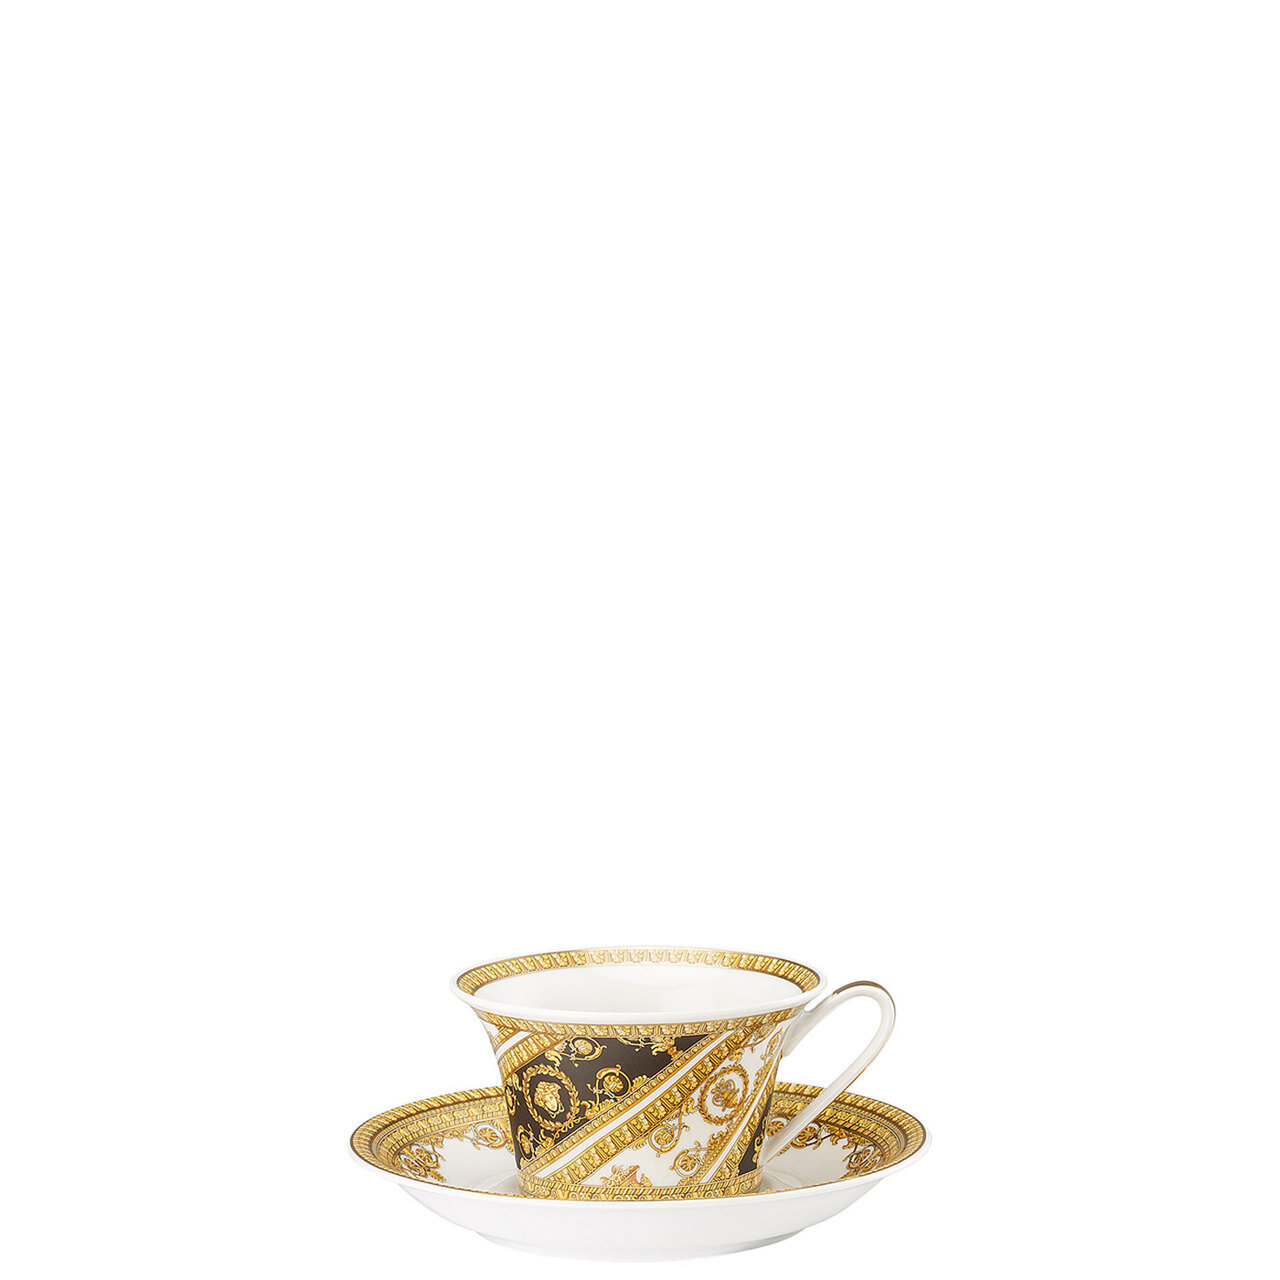 Versace I Love Baroque Tea Cup and Saucer 6 1/4 Inch